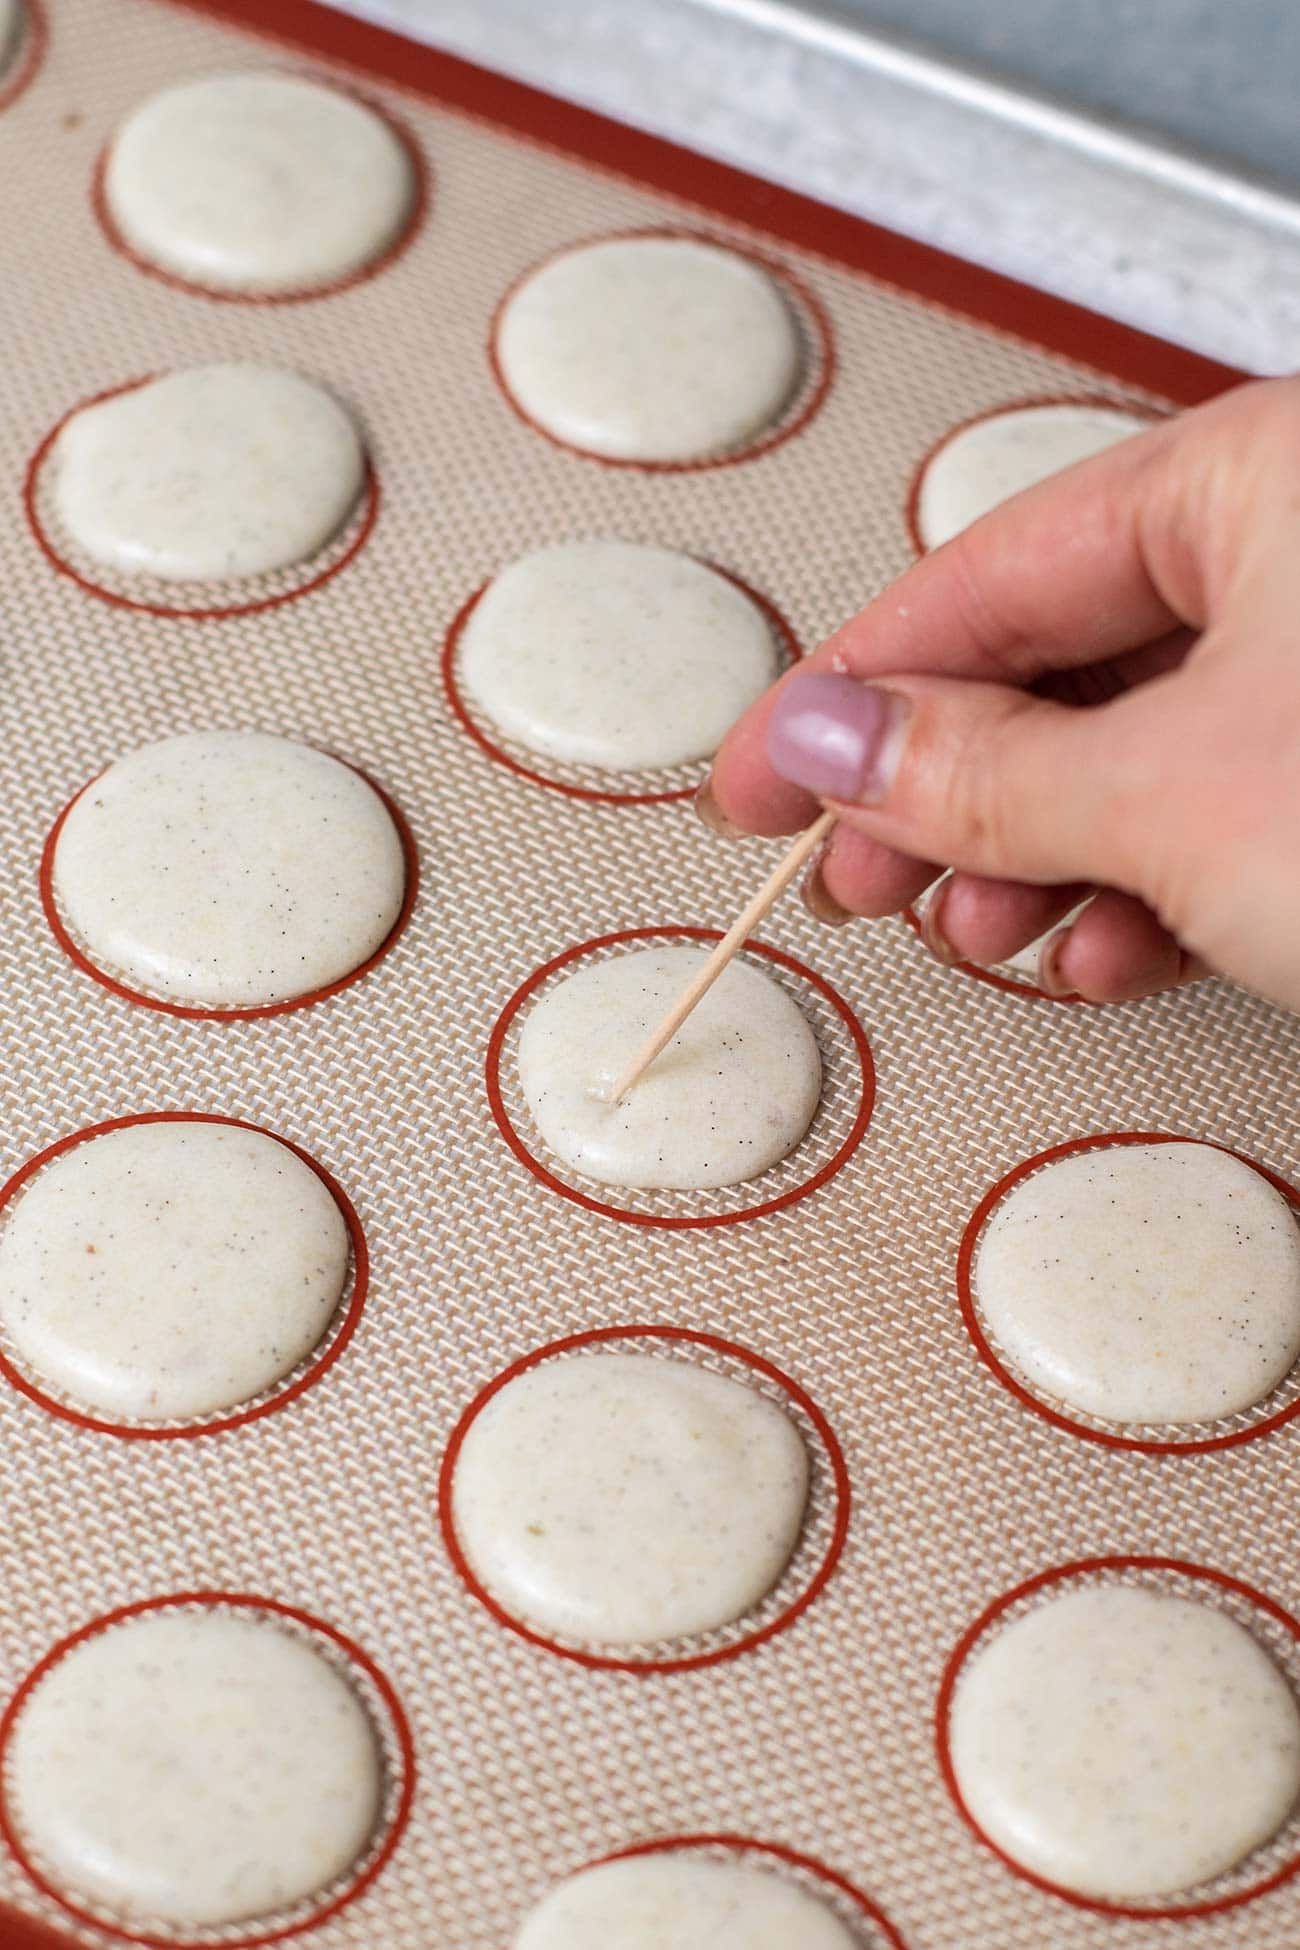 Popping air bubbles in the cookies.